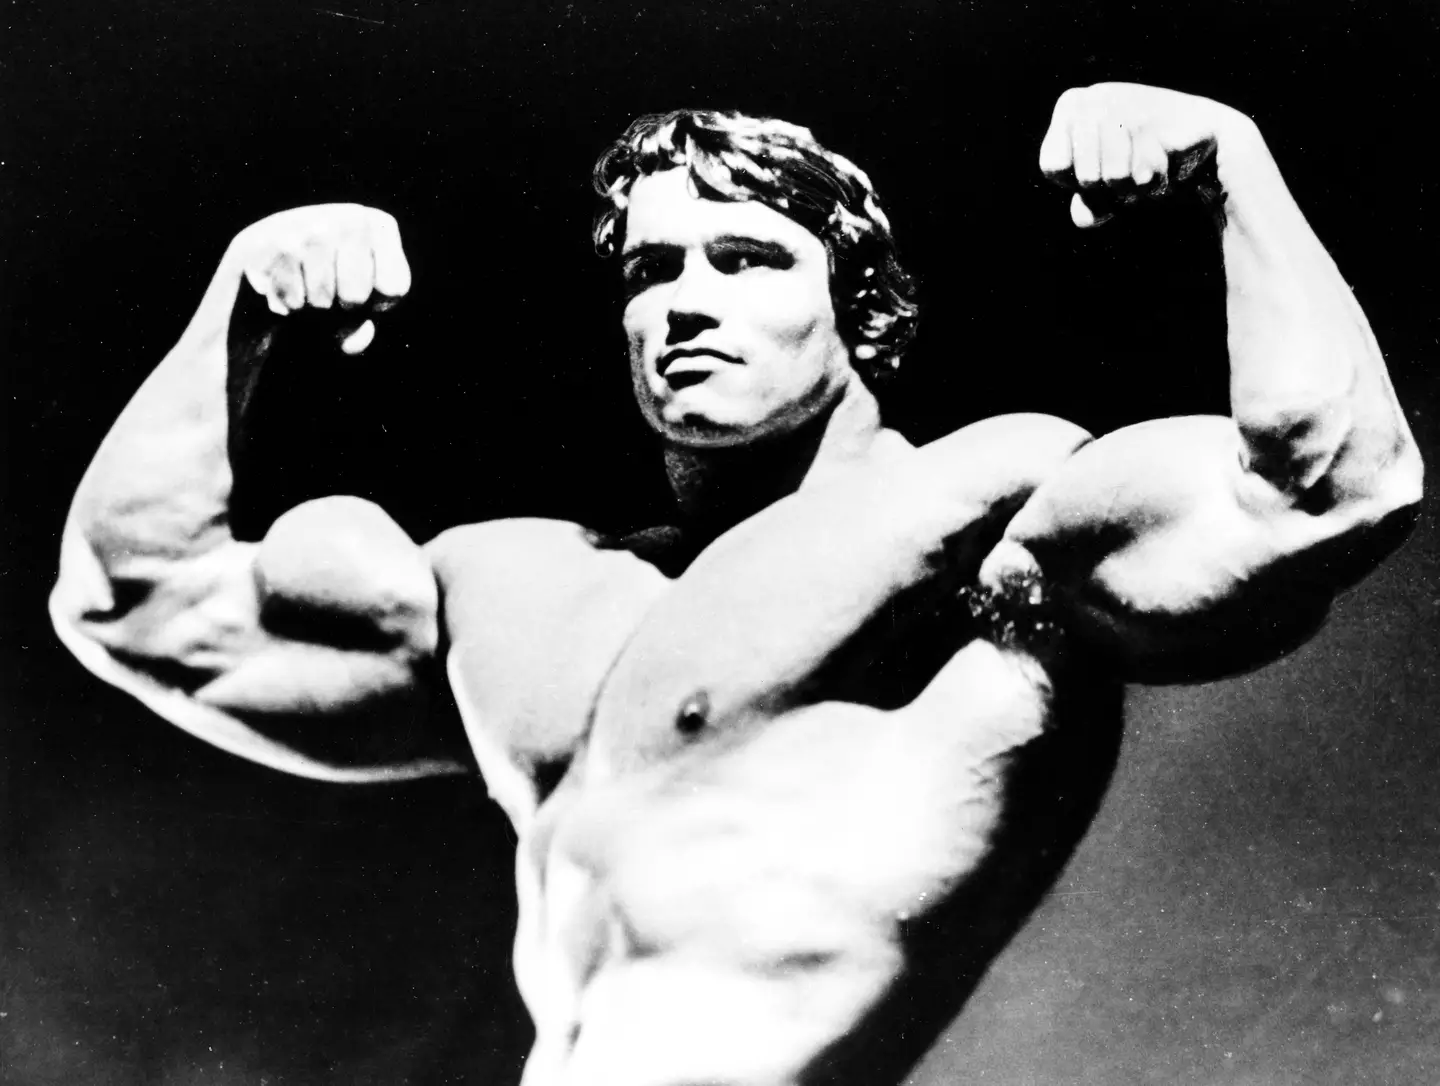 Schwarzenegger was king of the bodybuilding circuit back in the 70s.